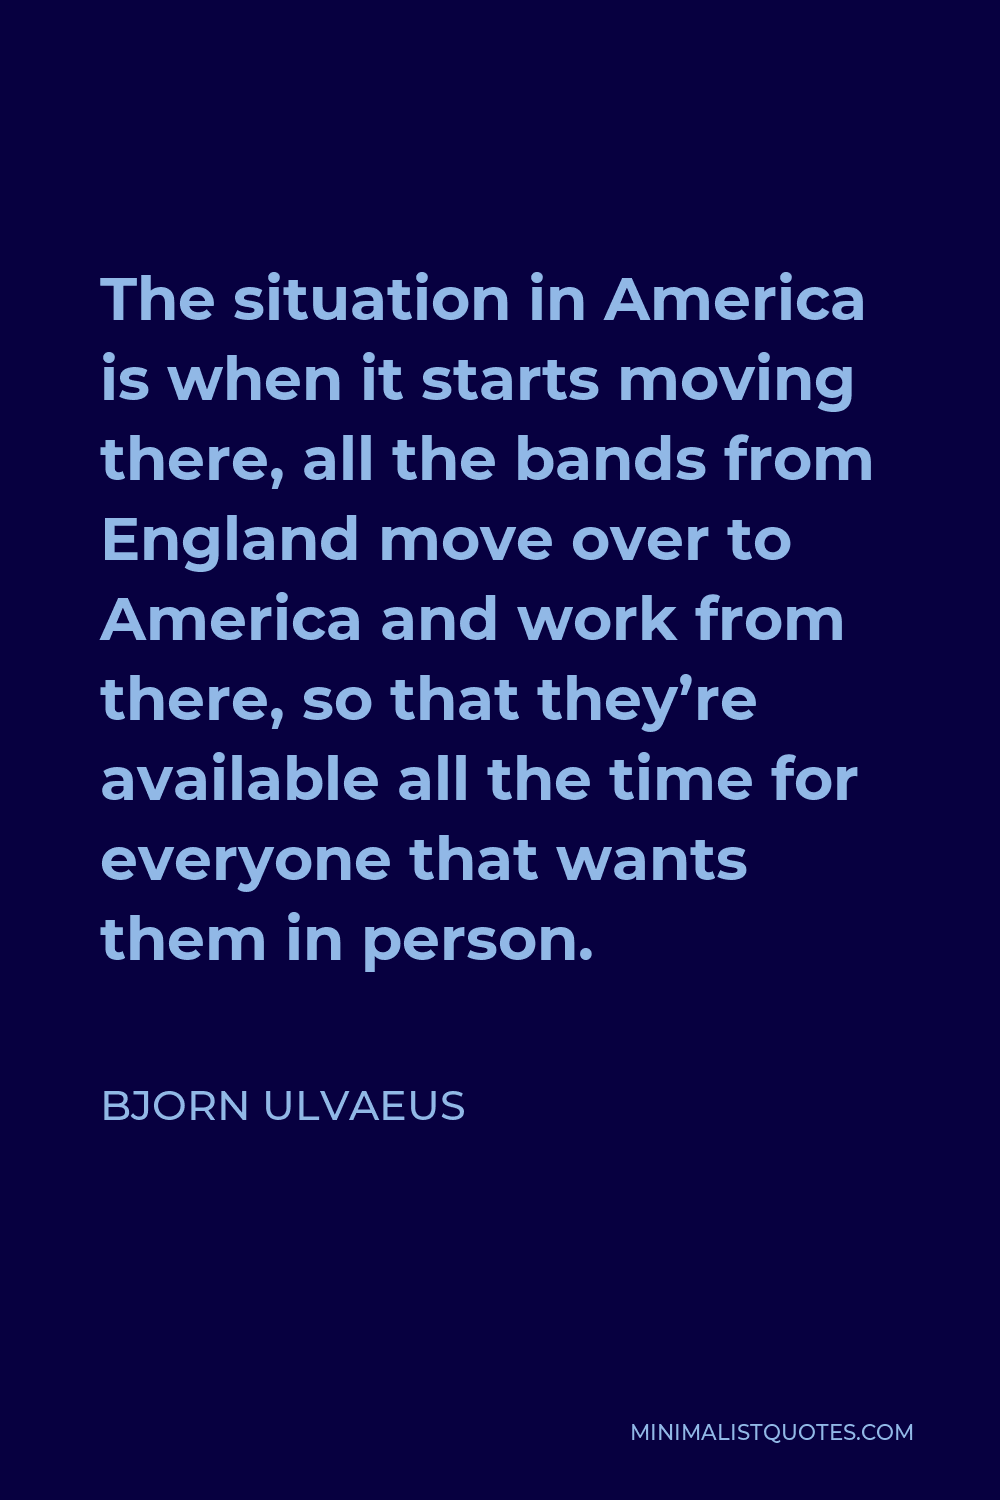 Bjorn Ulvaeus Quote - The situation in America is when it starts moving there, all the bands from England move over to America and work from there, so that they’re available all the time for everyone that wants them in person.